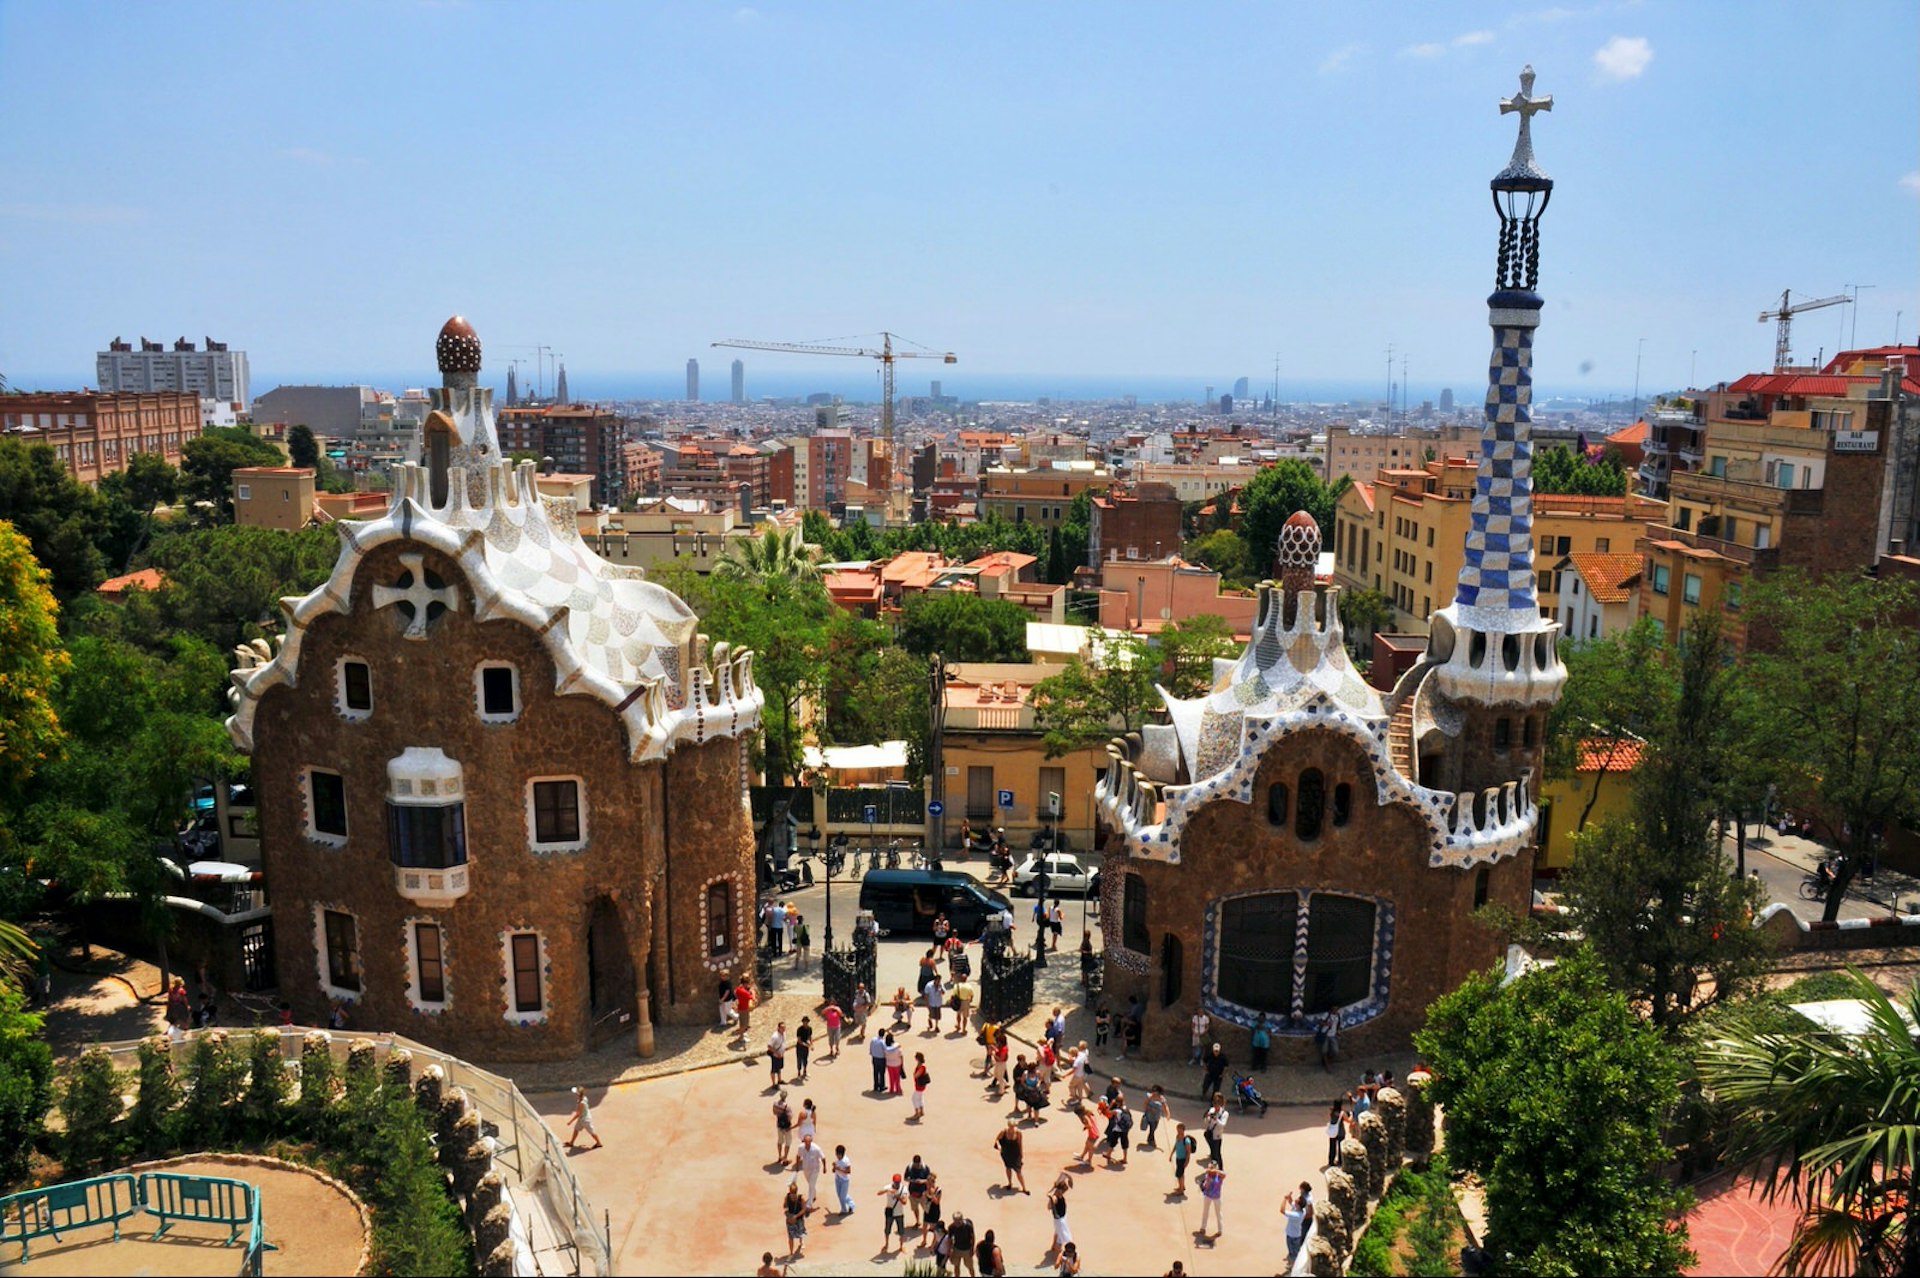 Walk off all those calories with a stroll through Park Güell, a public park containing examples of Gaudí architecture ©seattledredge/Budget Travel